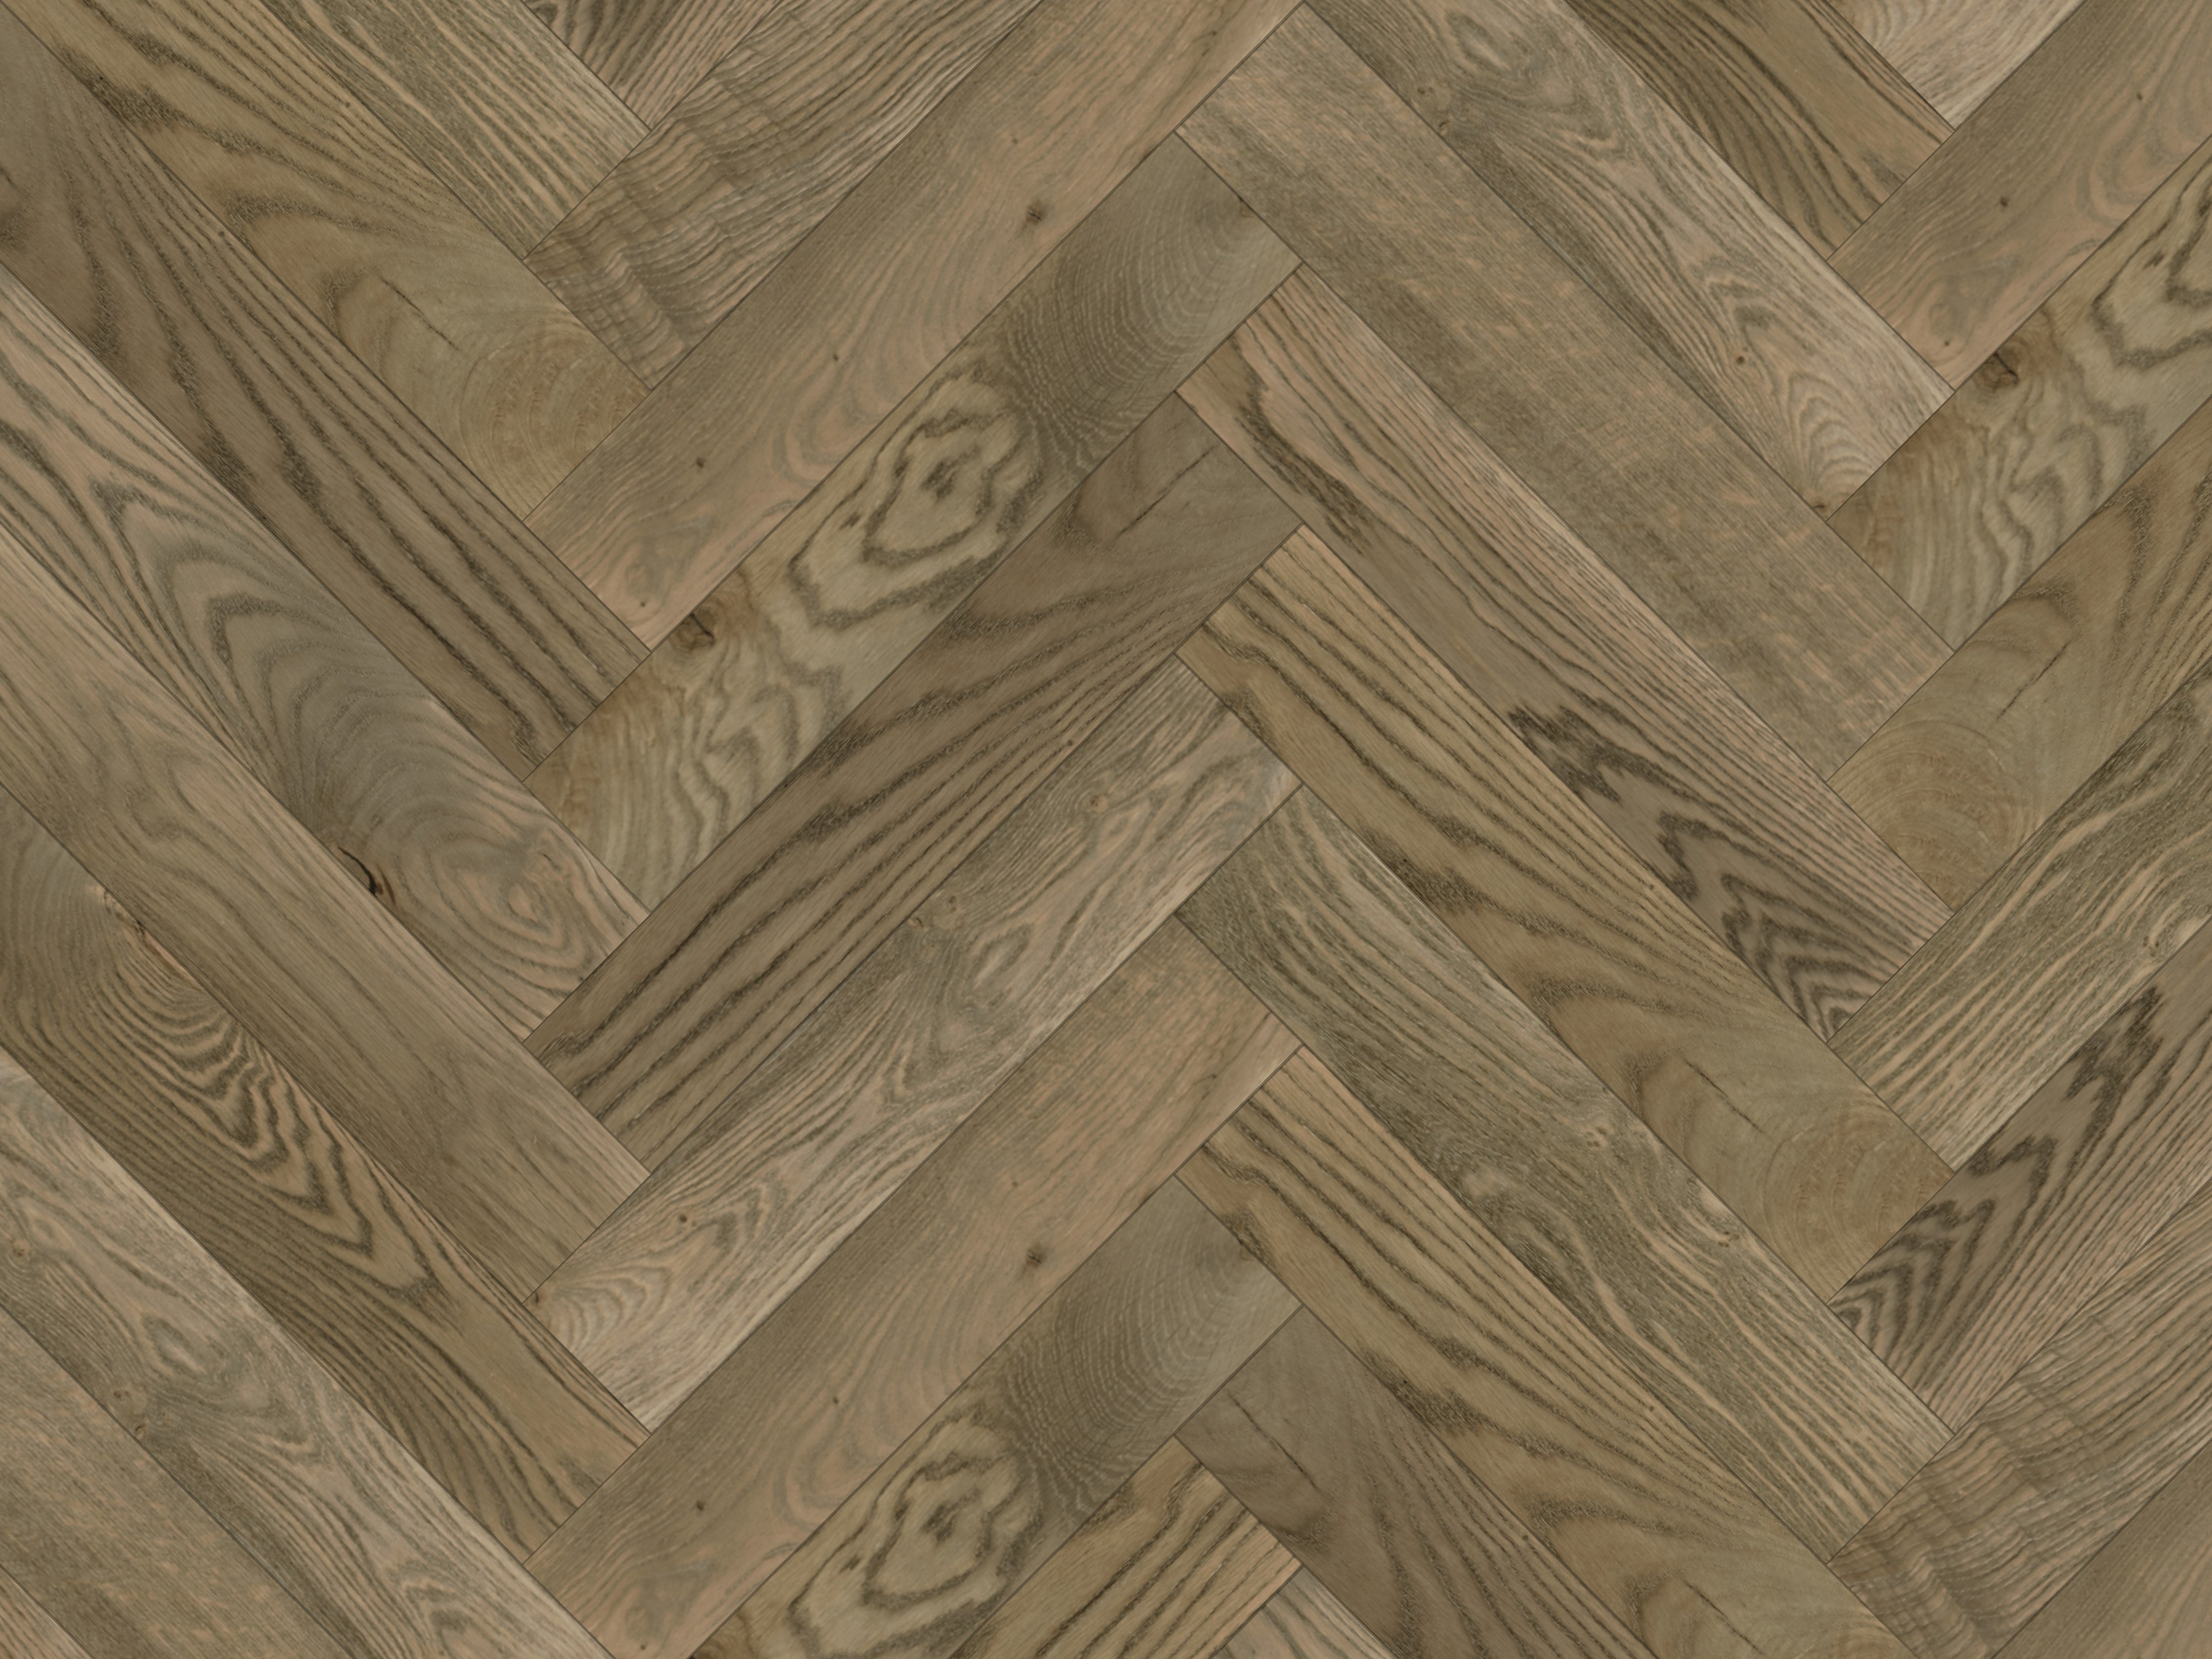 duchateau signature herringbone derval european oak engineered hardnatural wood floor uv oil finish for interior use distributed by surface group international